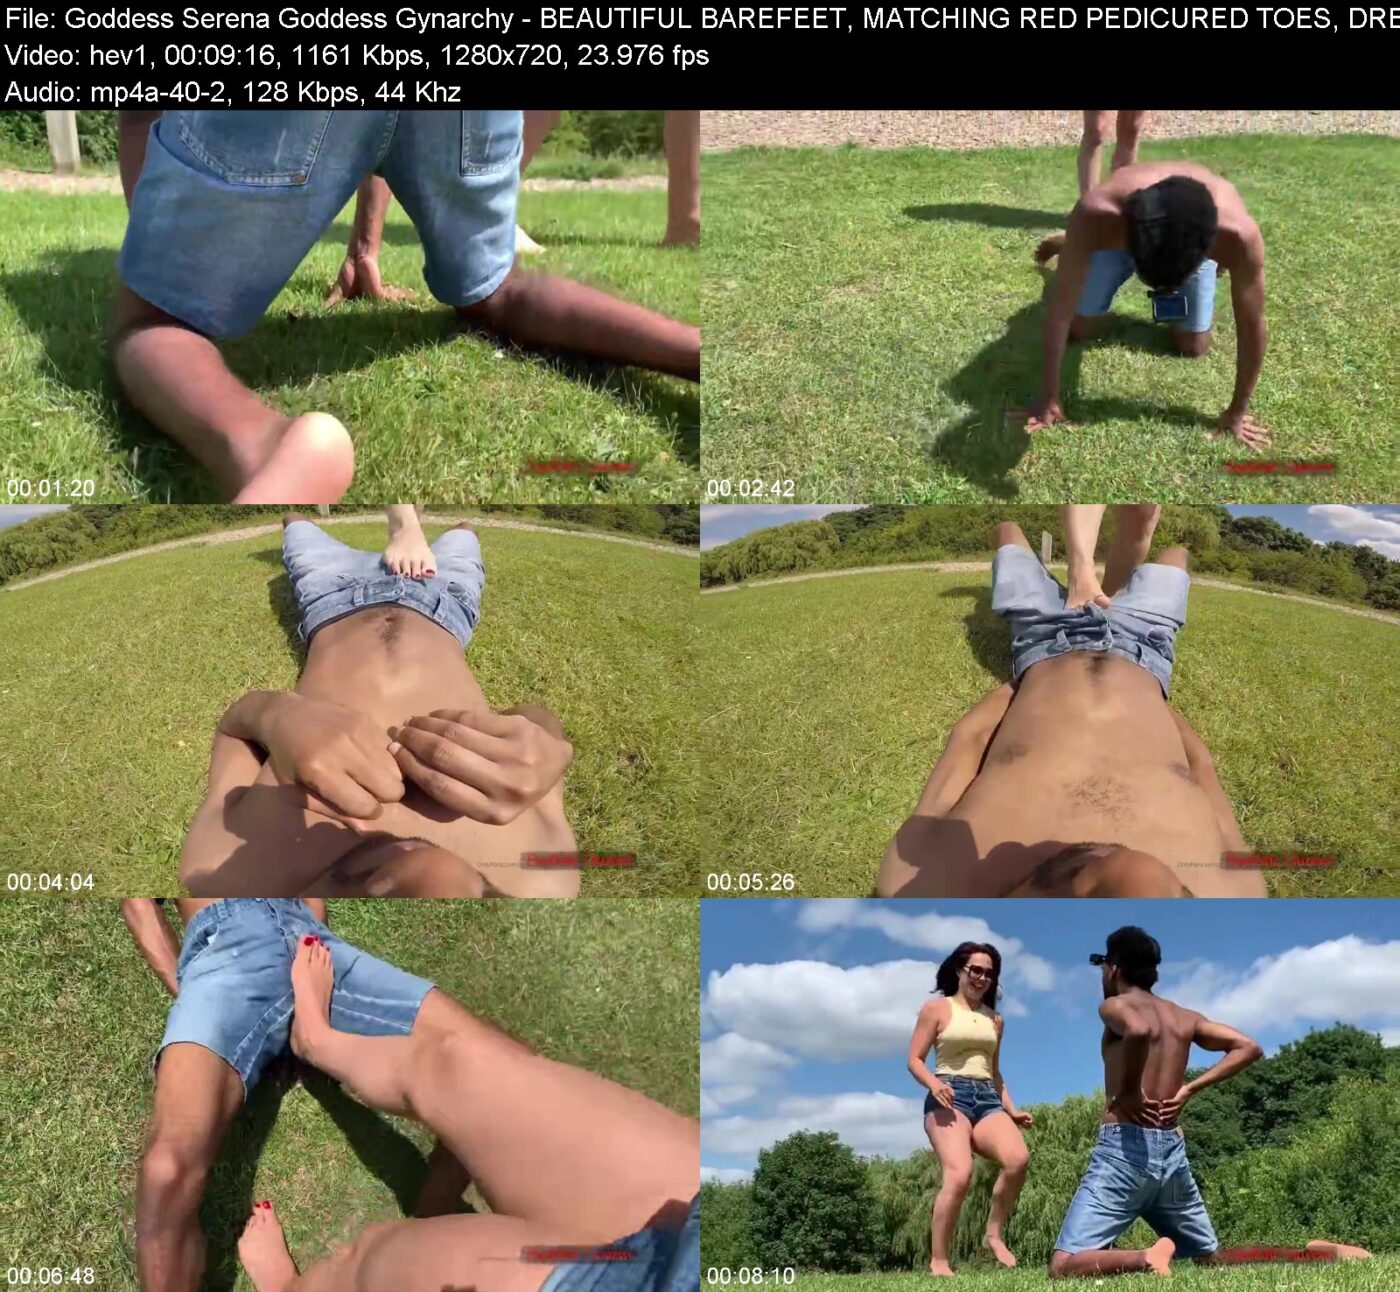 Actress: Goddess Serena Goddess Gynarchy. Title and Studio: BEAUTIFUL BAREFEET, MATCHING RED PEDICURED TOES, DRESSED CASUALLY IN THEIR JEAN SHORTS AND BRIGHT TOPS